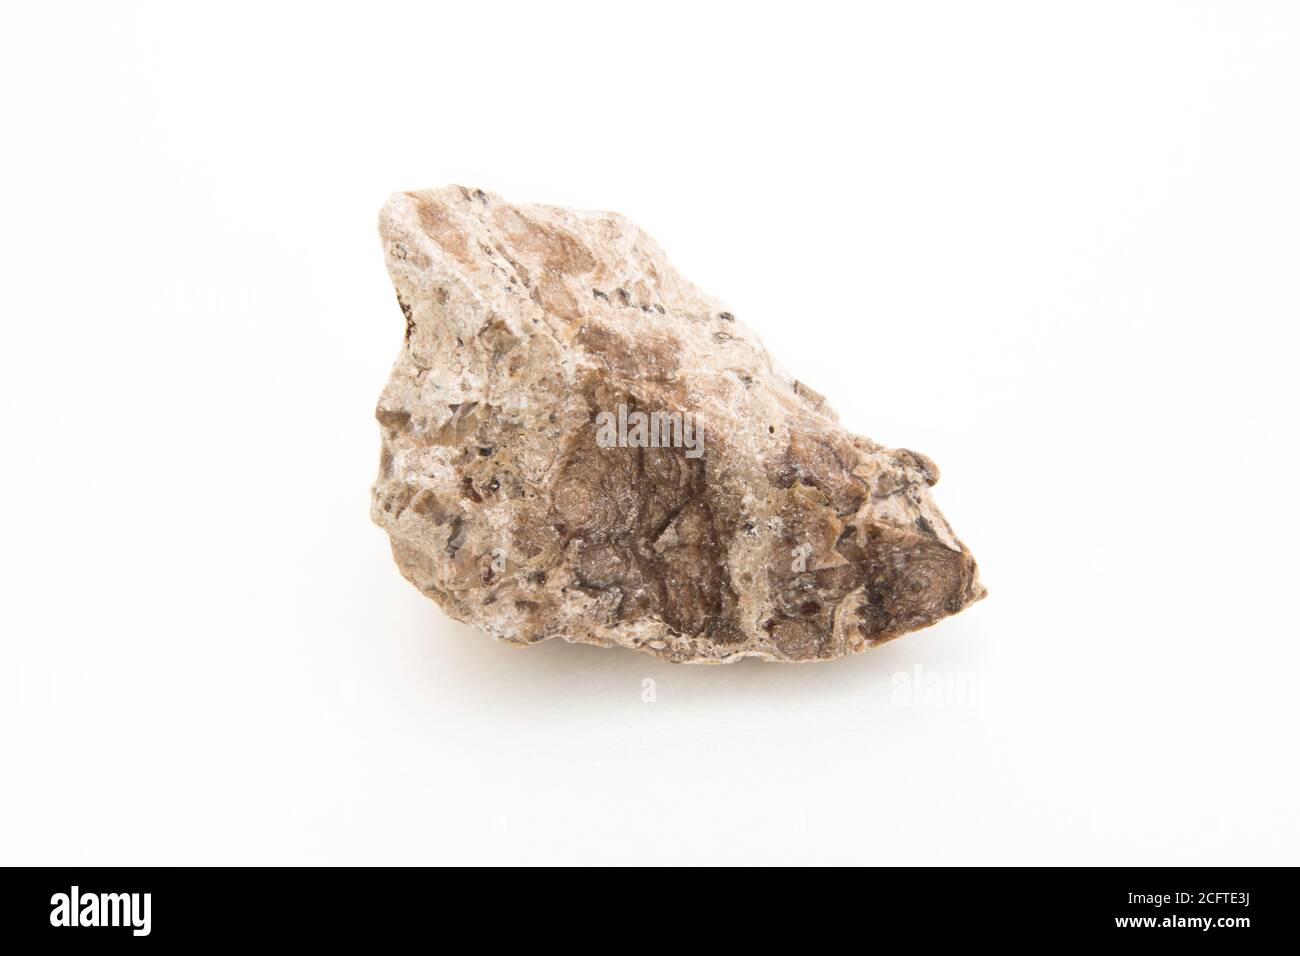 detail of cyanophyta fossil isolated over white background Stock Photo